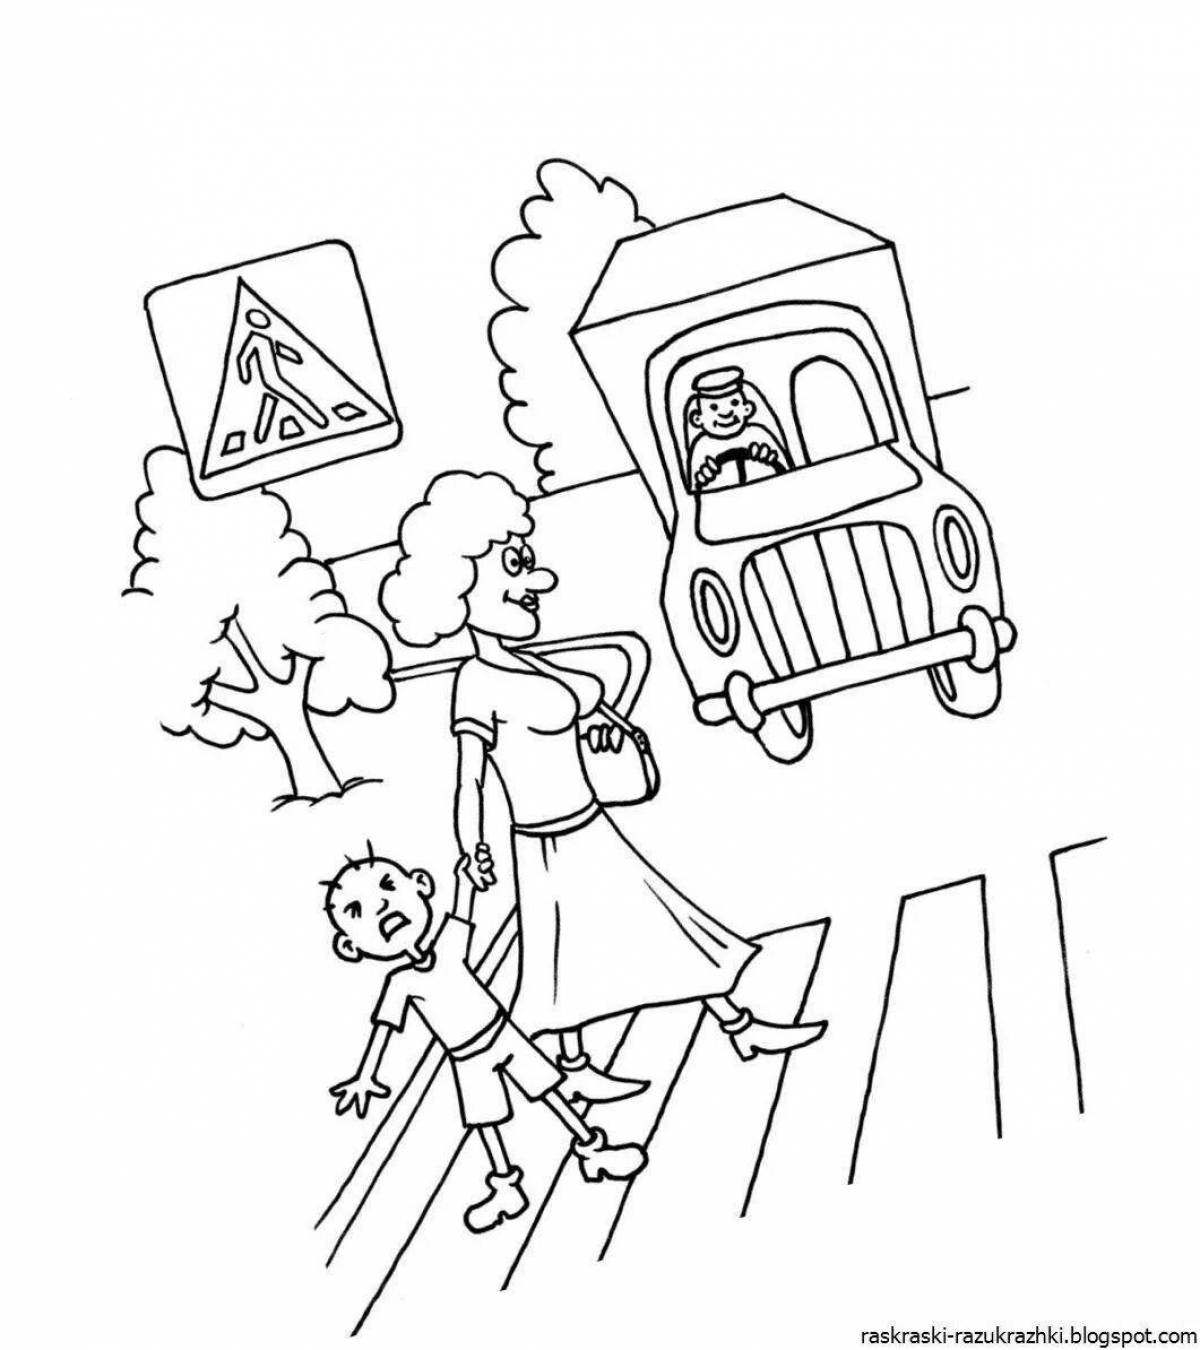 Glorious traffic safety coloring page